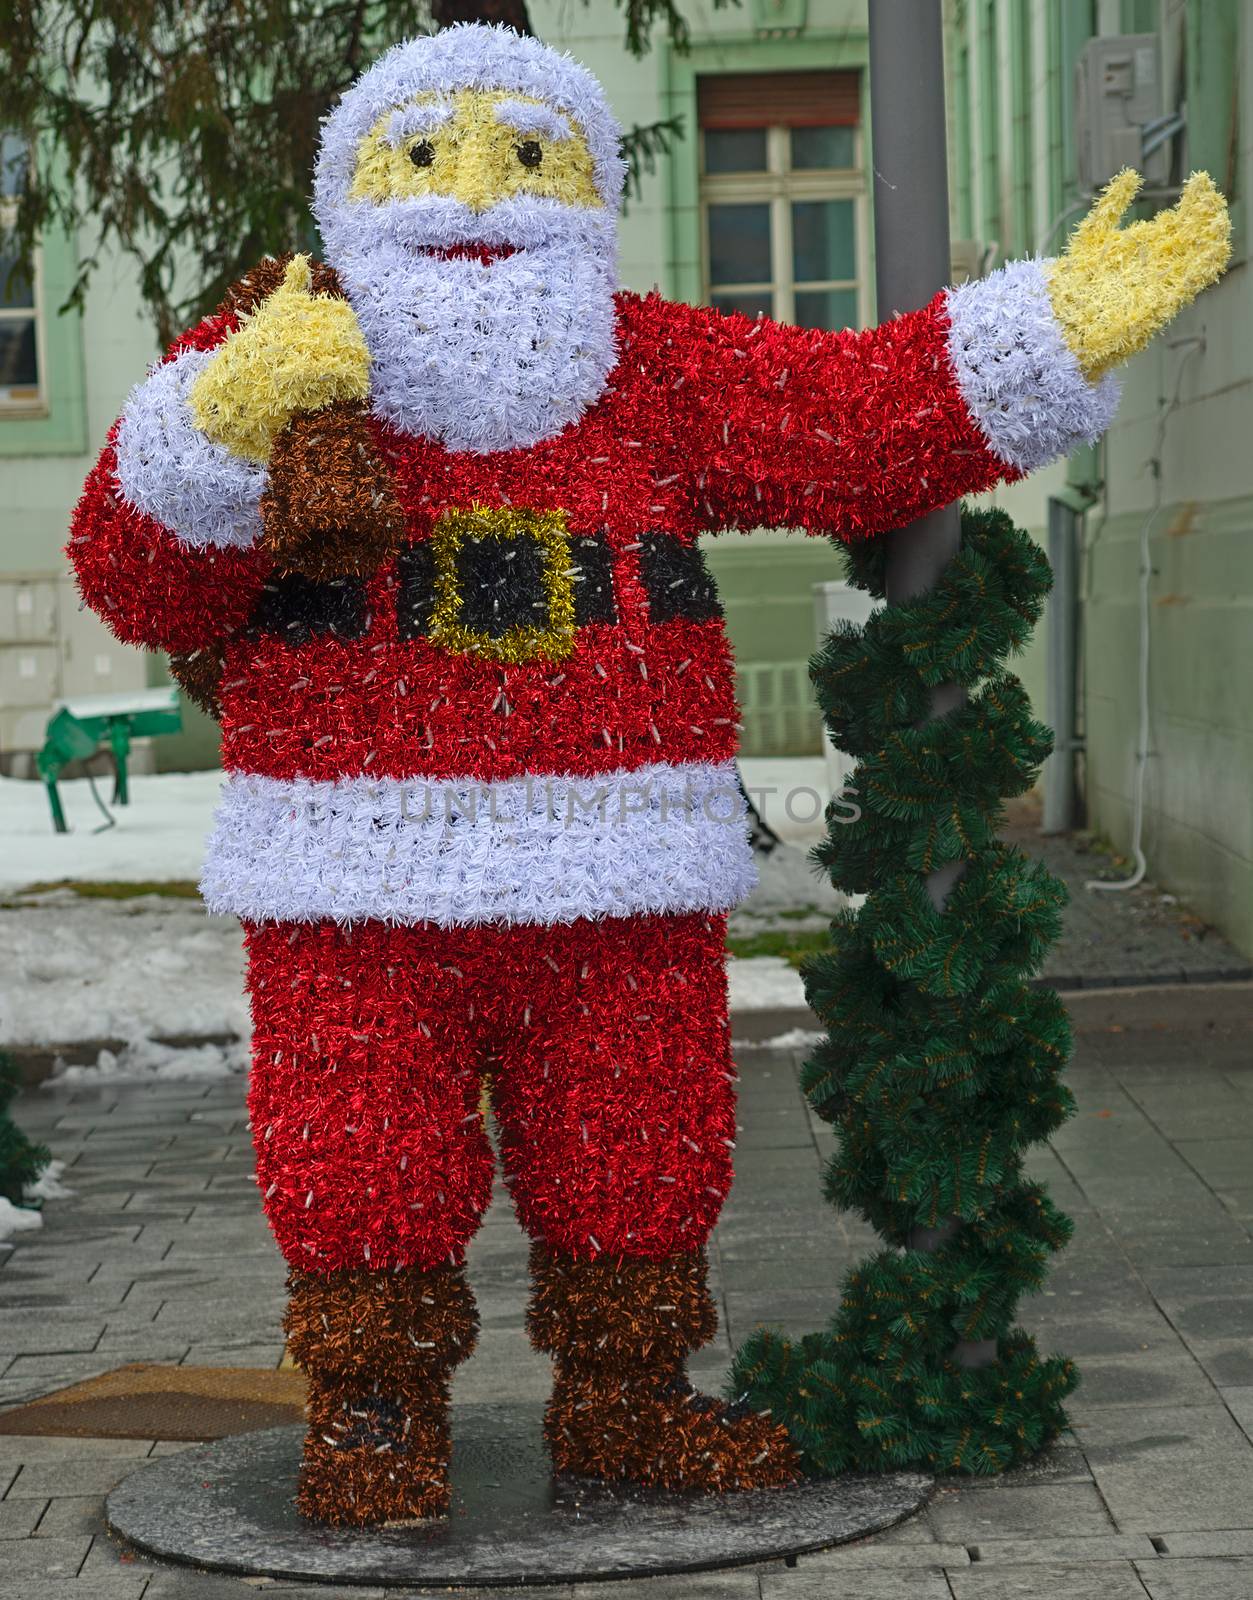 Santa Claus made out of Christmas decorations by sheriffkule